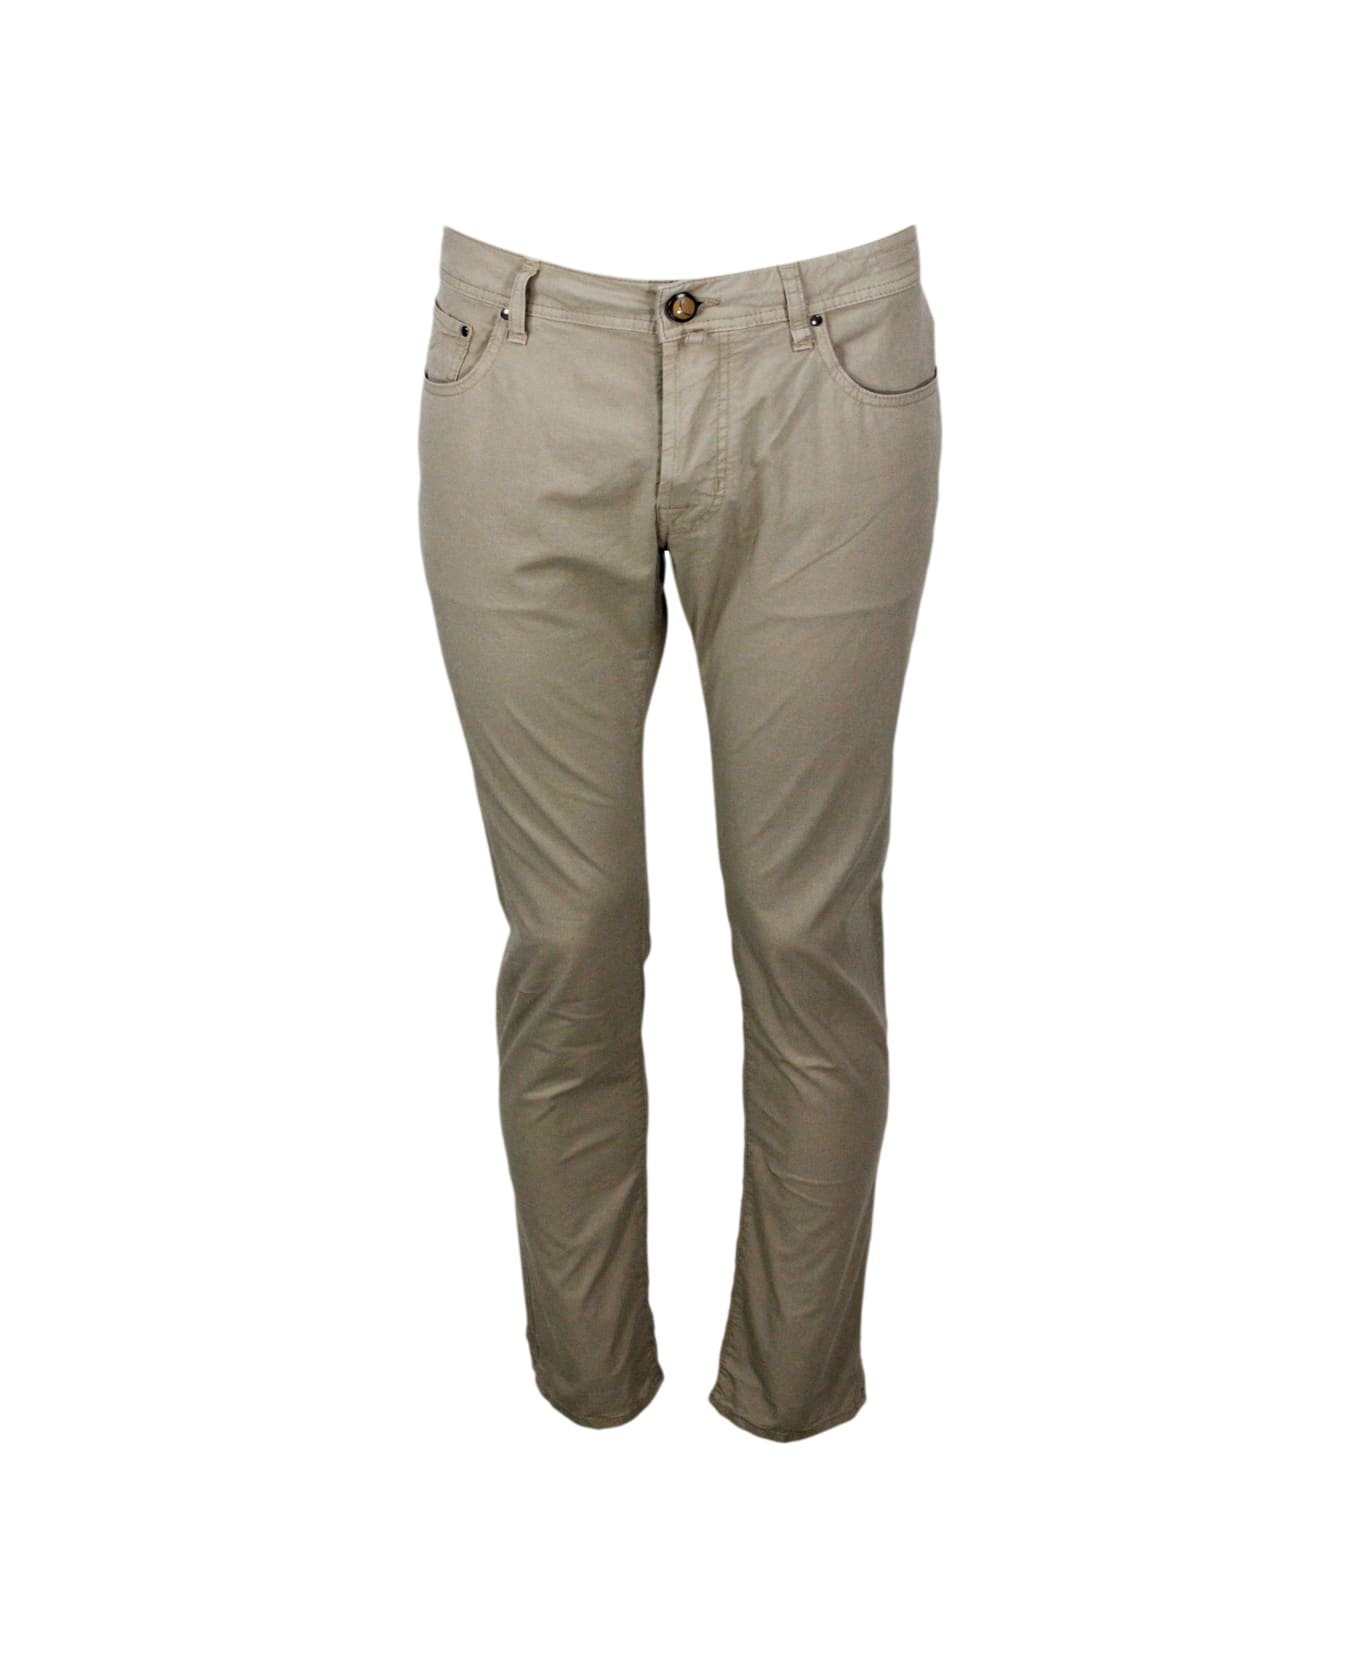 Jacob Cohen Bard J688 Luxury Edition Trousers In Soft Stretch Cotton With 5 Pockets With Closure Buttons And Lacquered Button And Pony Skin Tag With Logo - Beige